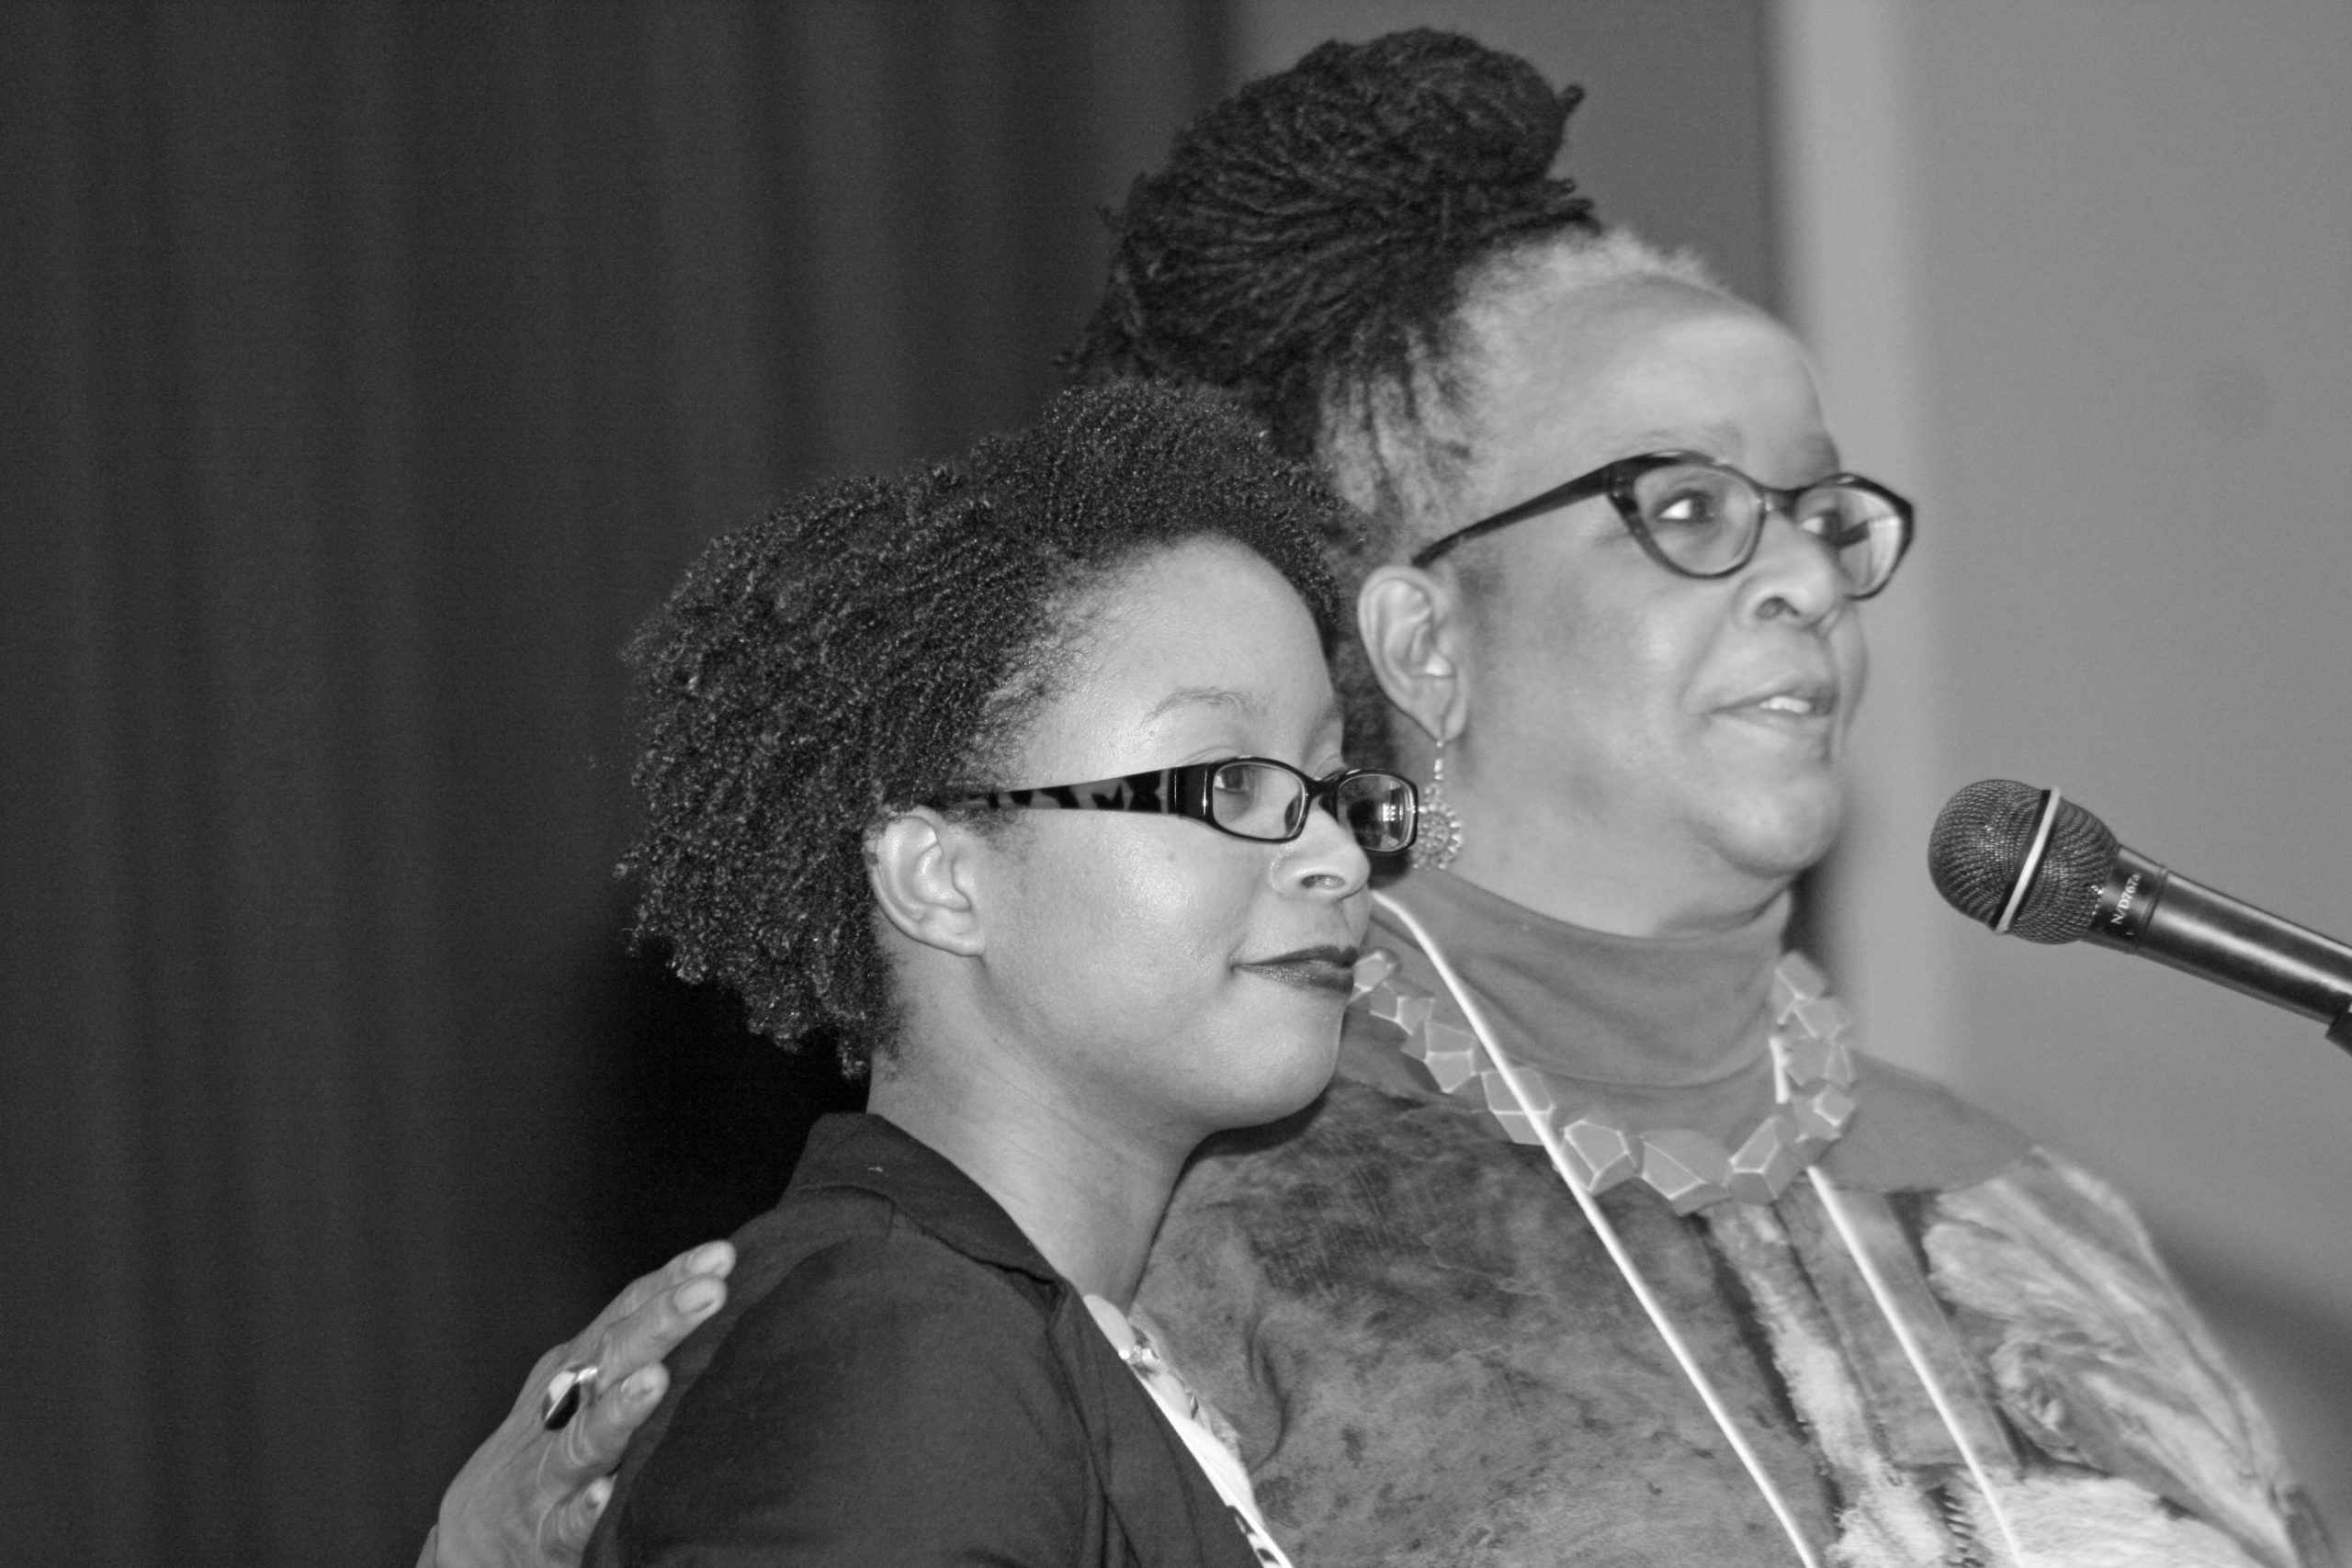 DaVonne Harris, left, and Michelle Armster present at the Hope for the Future III conference in January 2014. (Photo by Carol Roth)